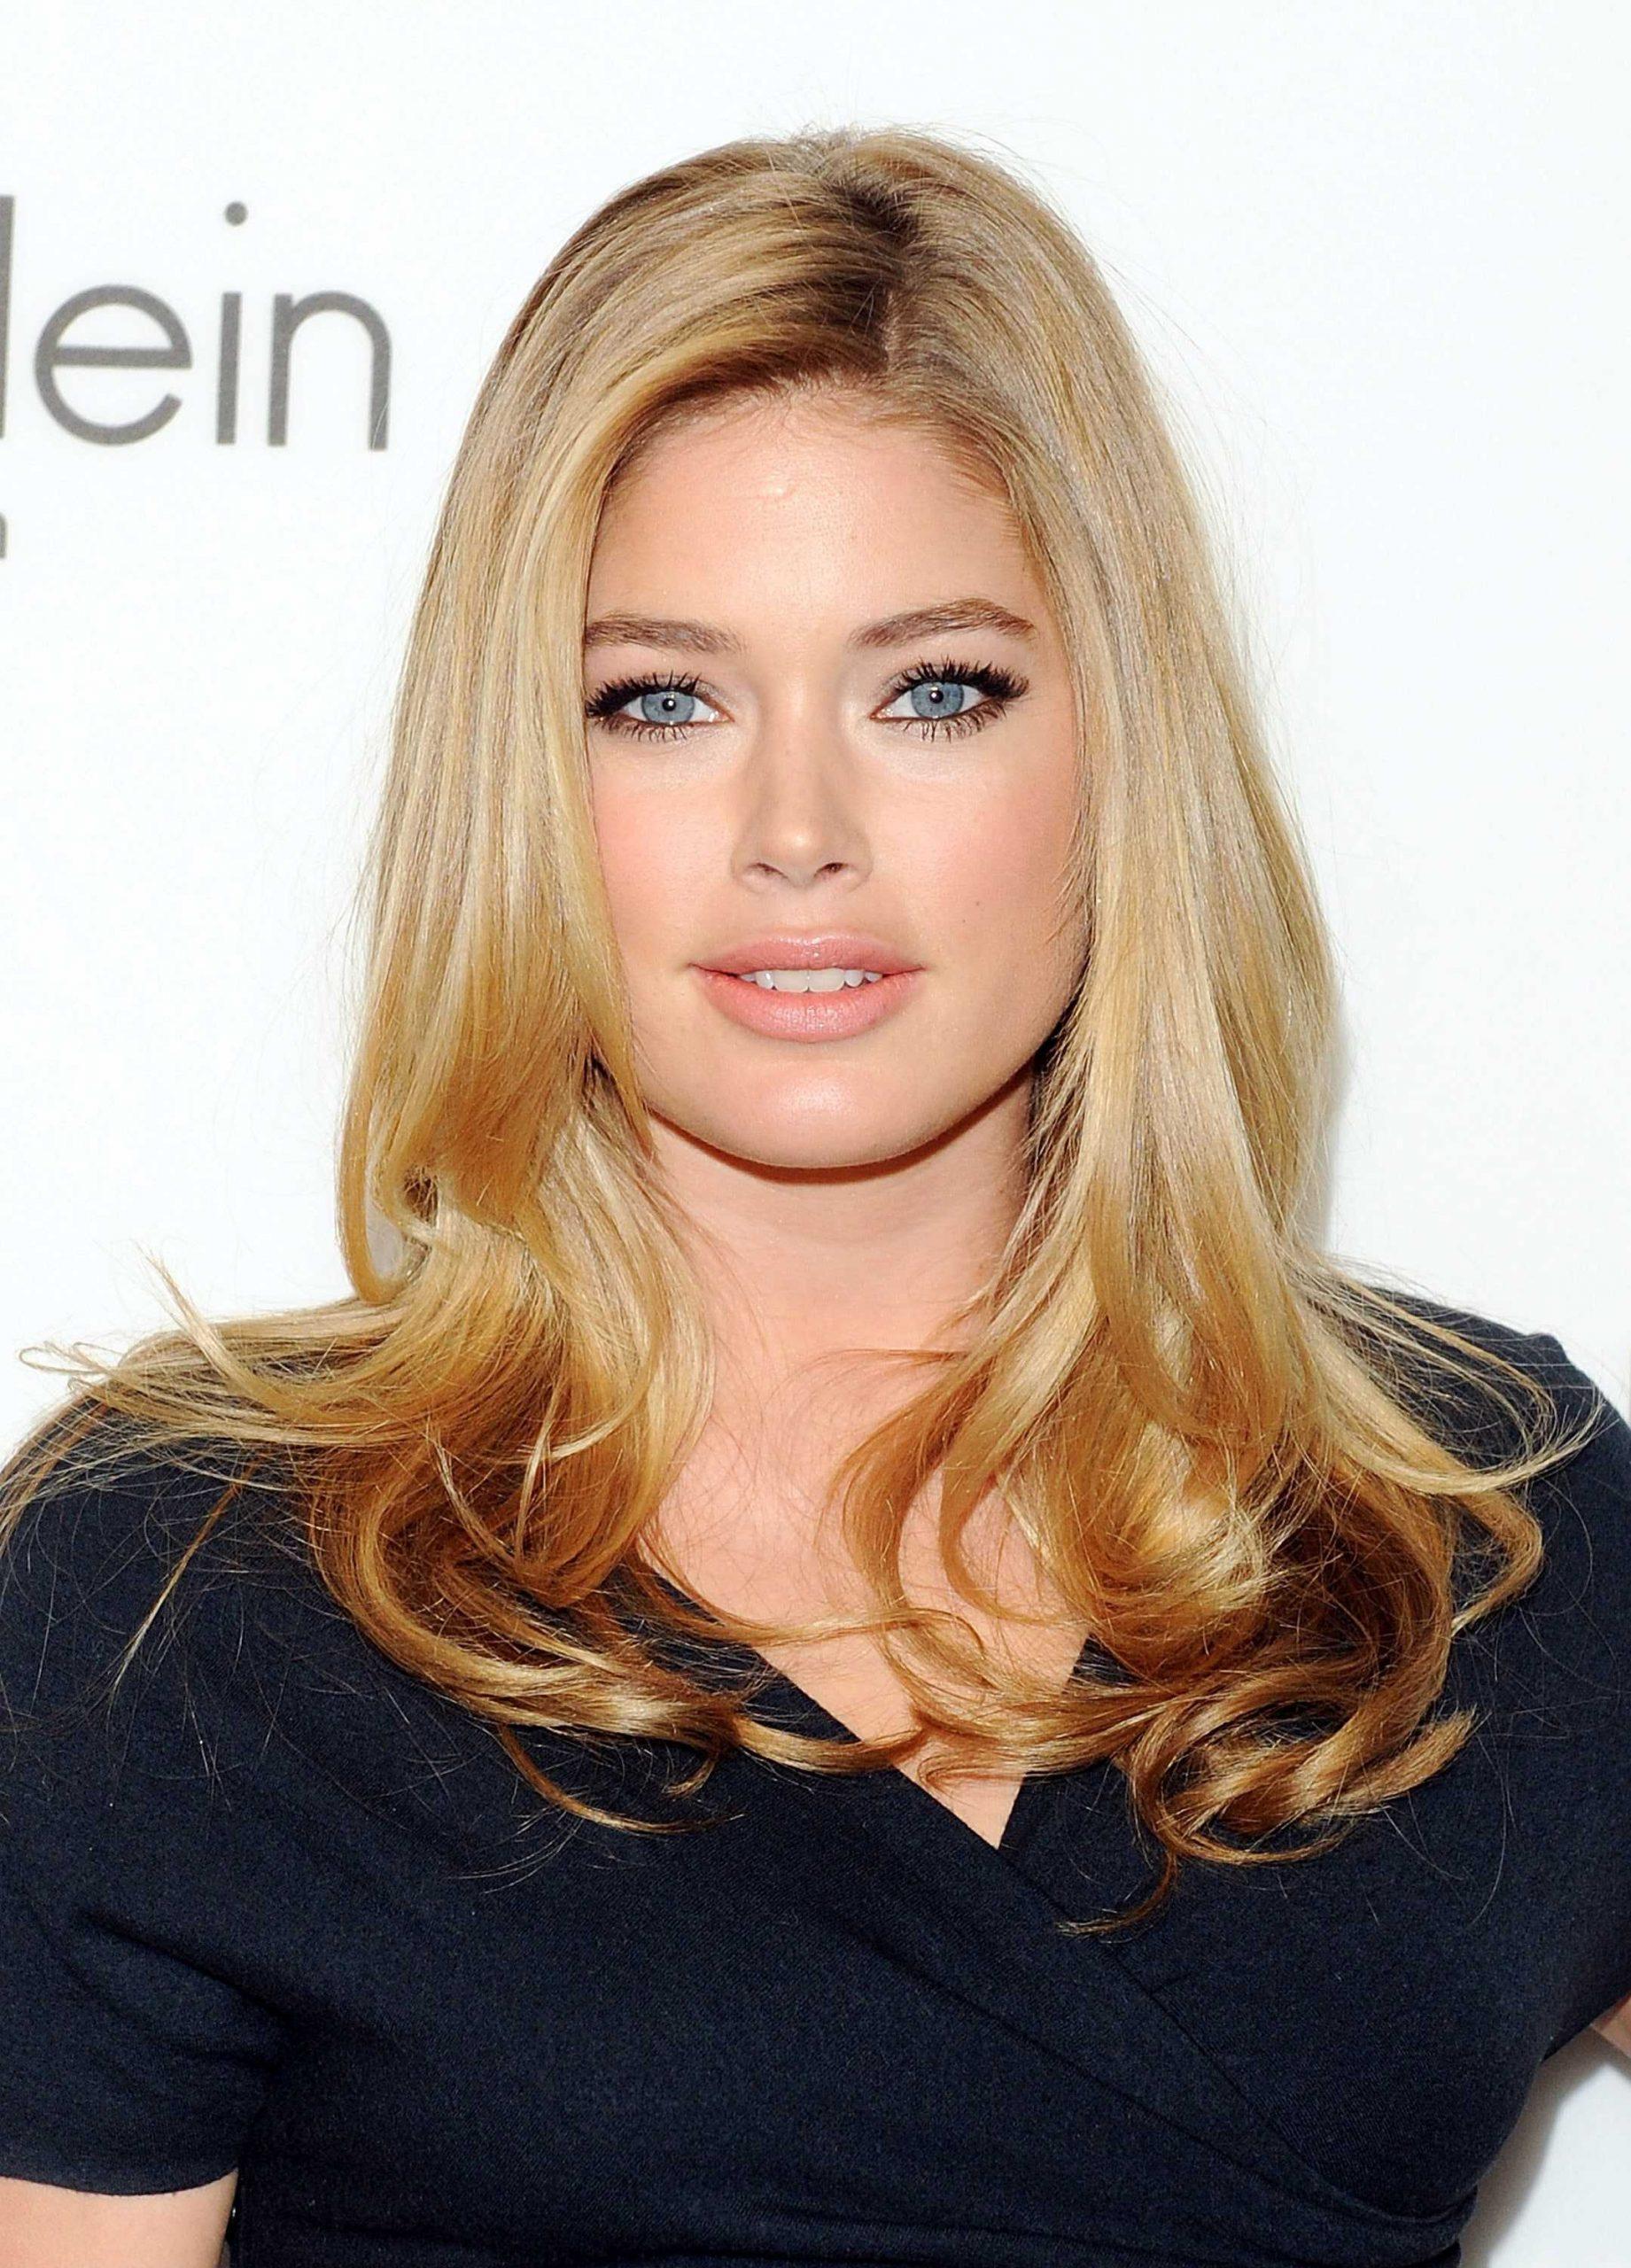 75+ Hot And Sexy Pictures Of Doutzen Kroes Will Make You Life A Bliss | Best Of Comic Books